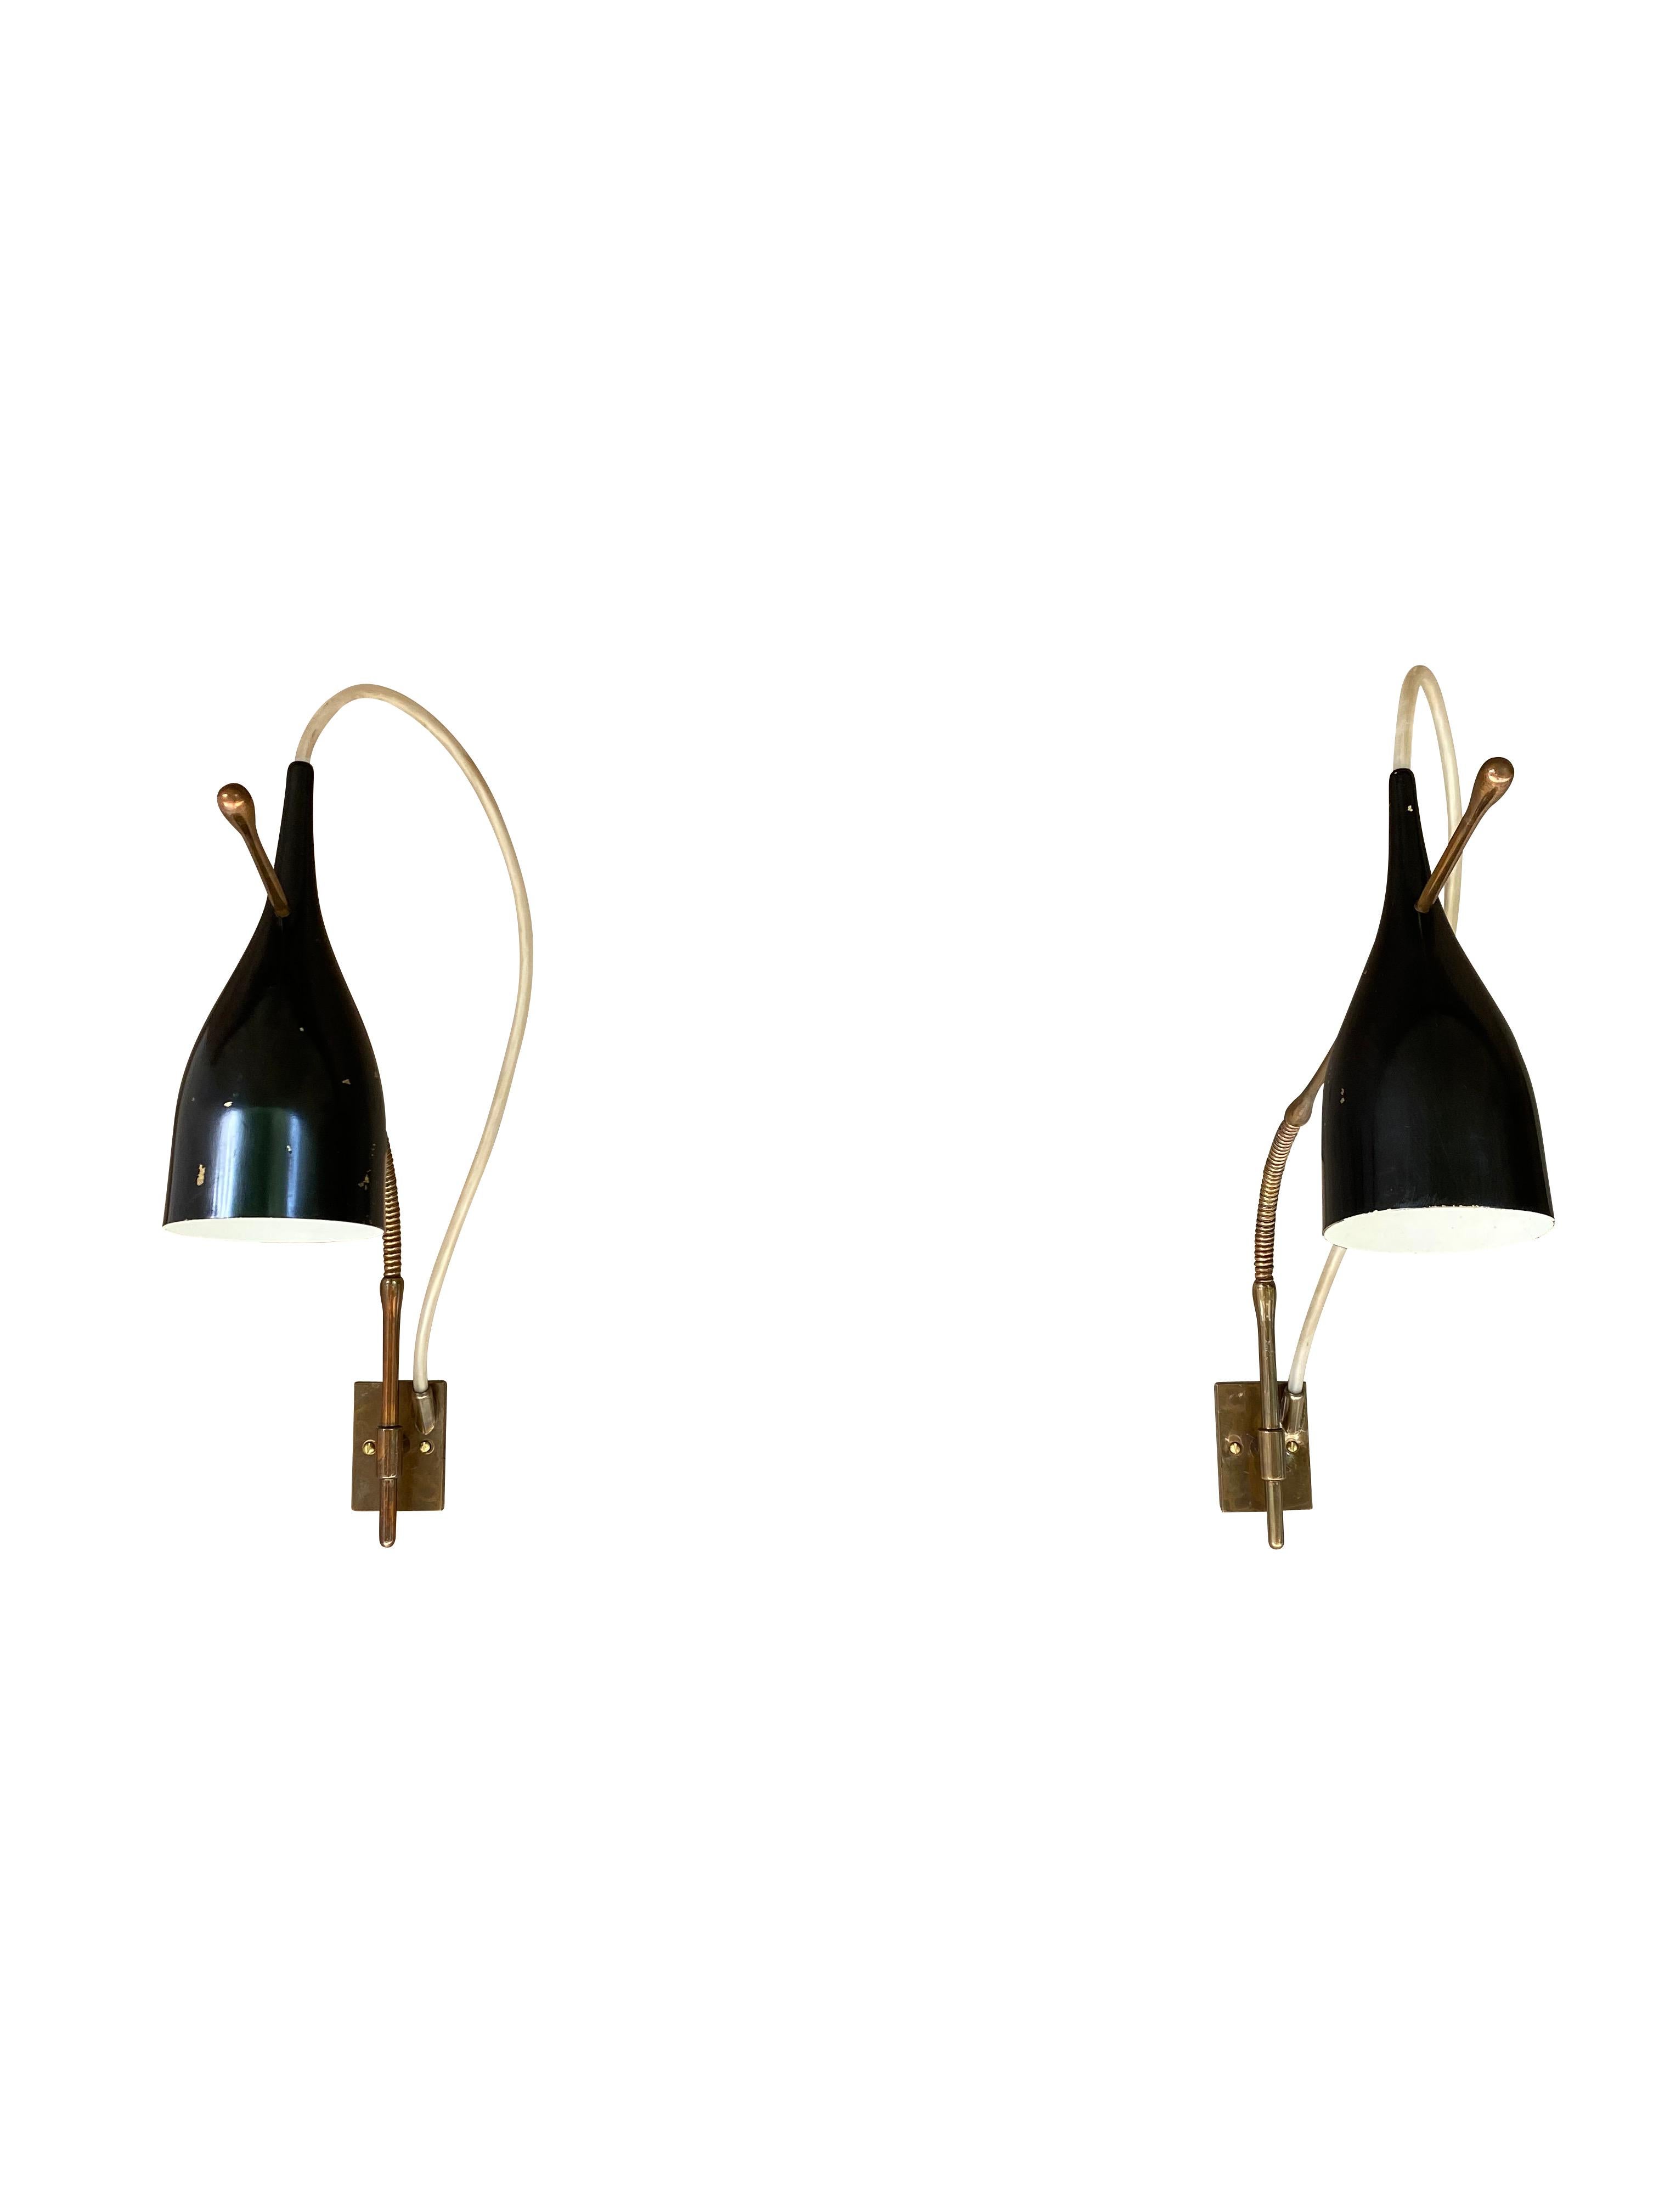 Rare wall sconce, Lucinella model number 14140, by Angelo Lelii (Lelli) for his company, Arredoluce, 1950. 

Structure compromised of flexible stem and wall plate in brass. Visibly encased electric wire in flexible tandem. Shades are in black